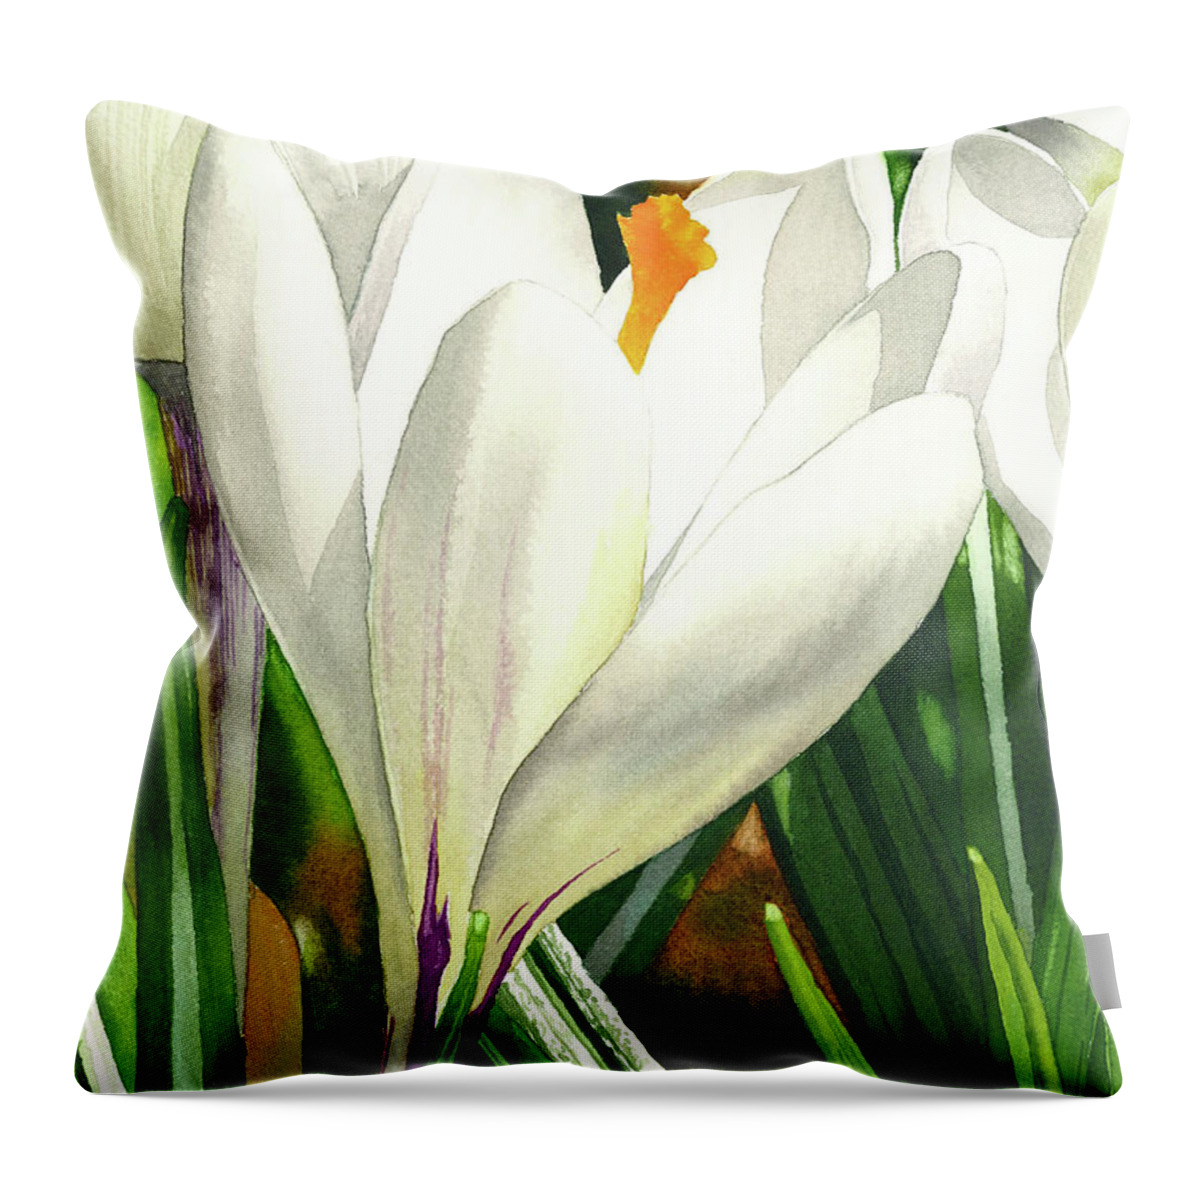 White Throw Pillow featuring the painting White Crocus by Espero Art